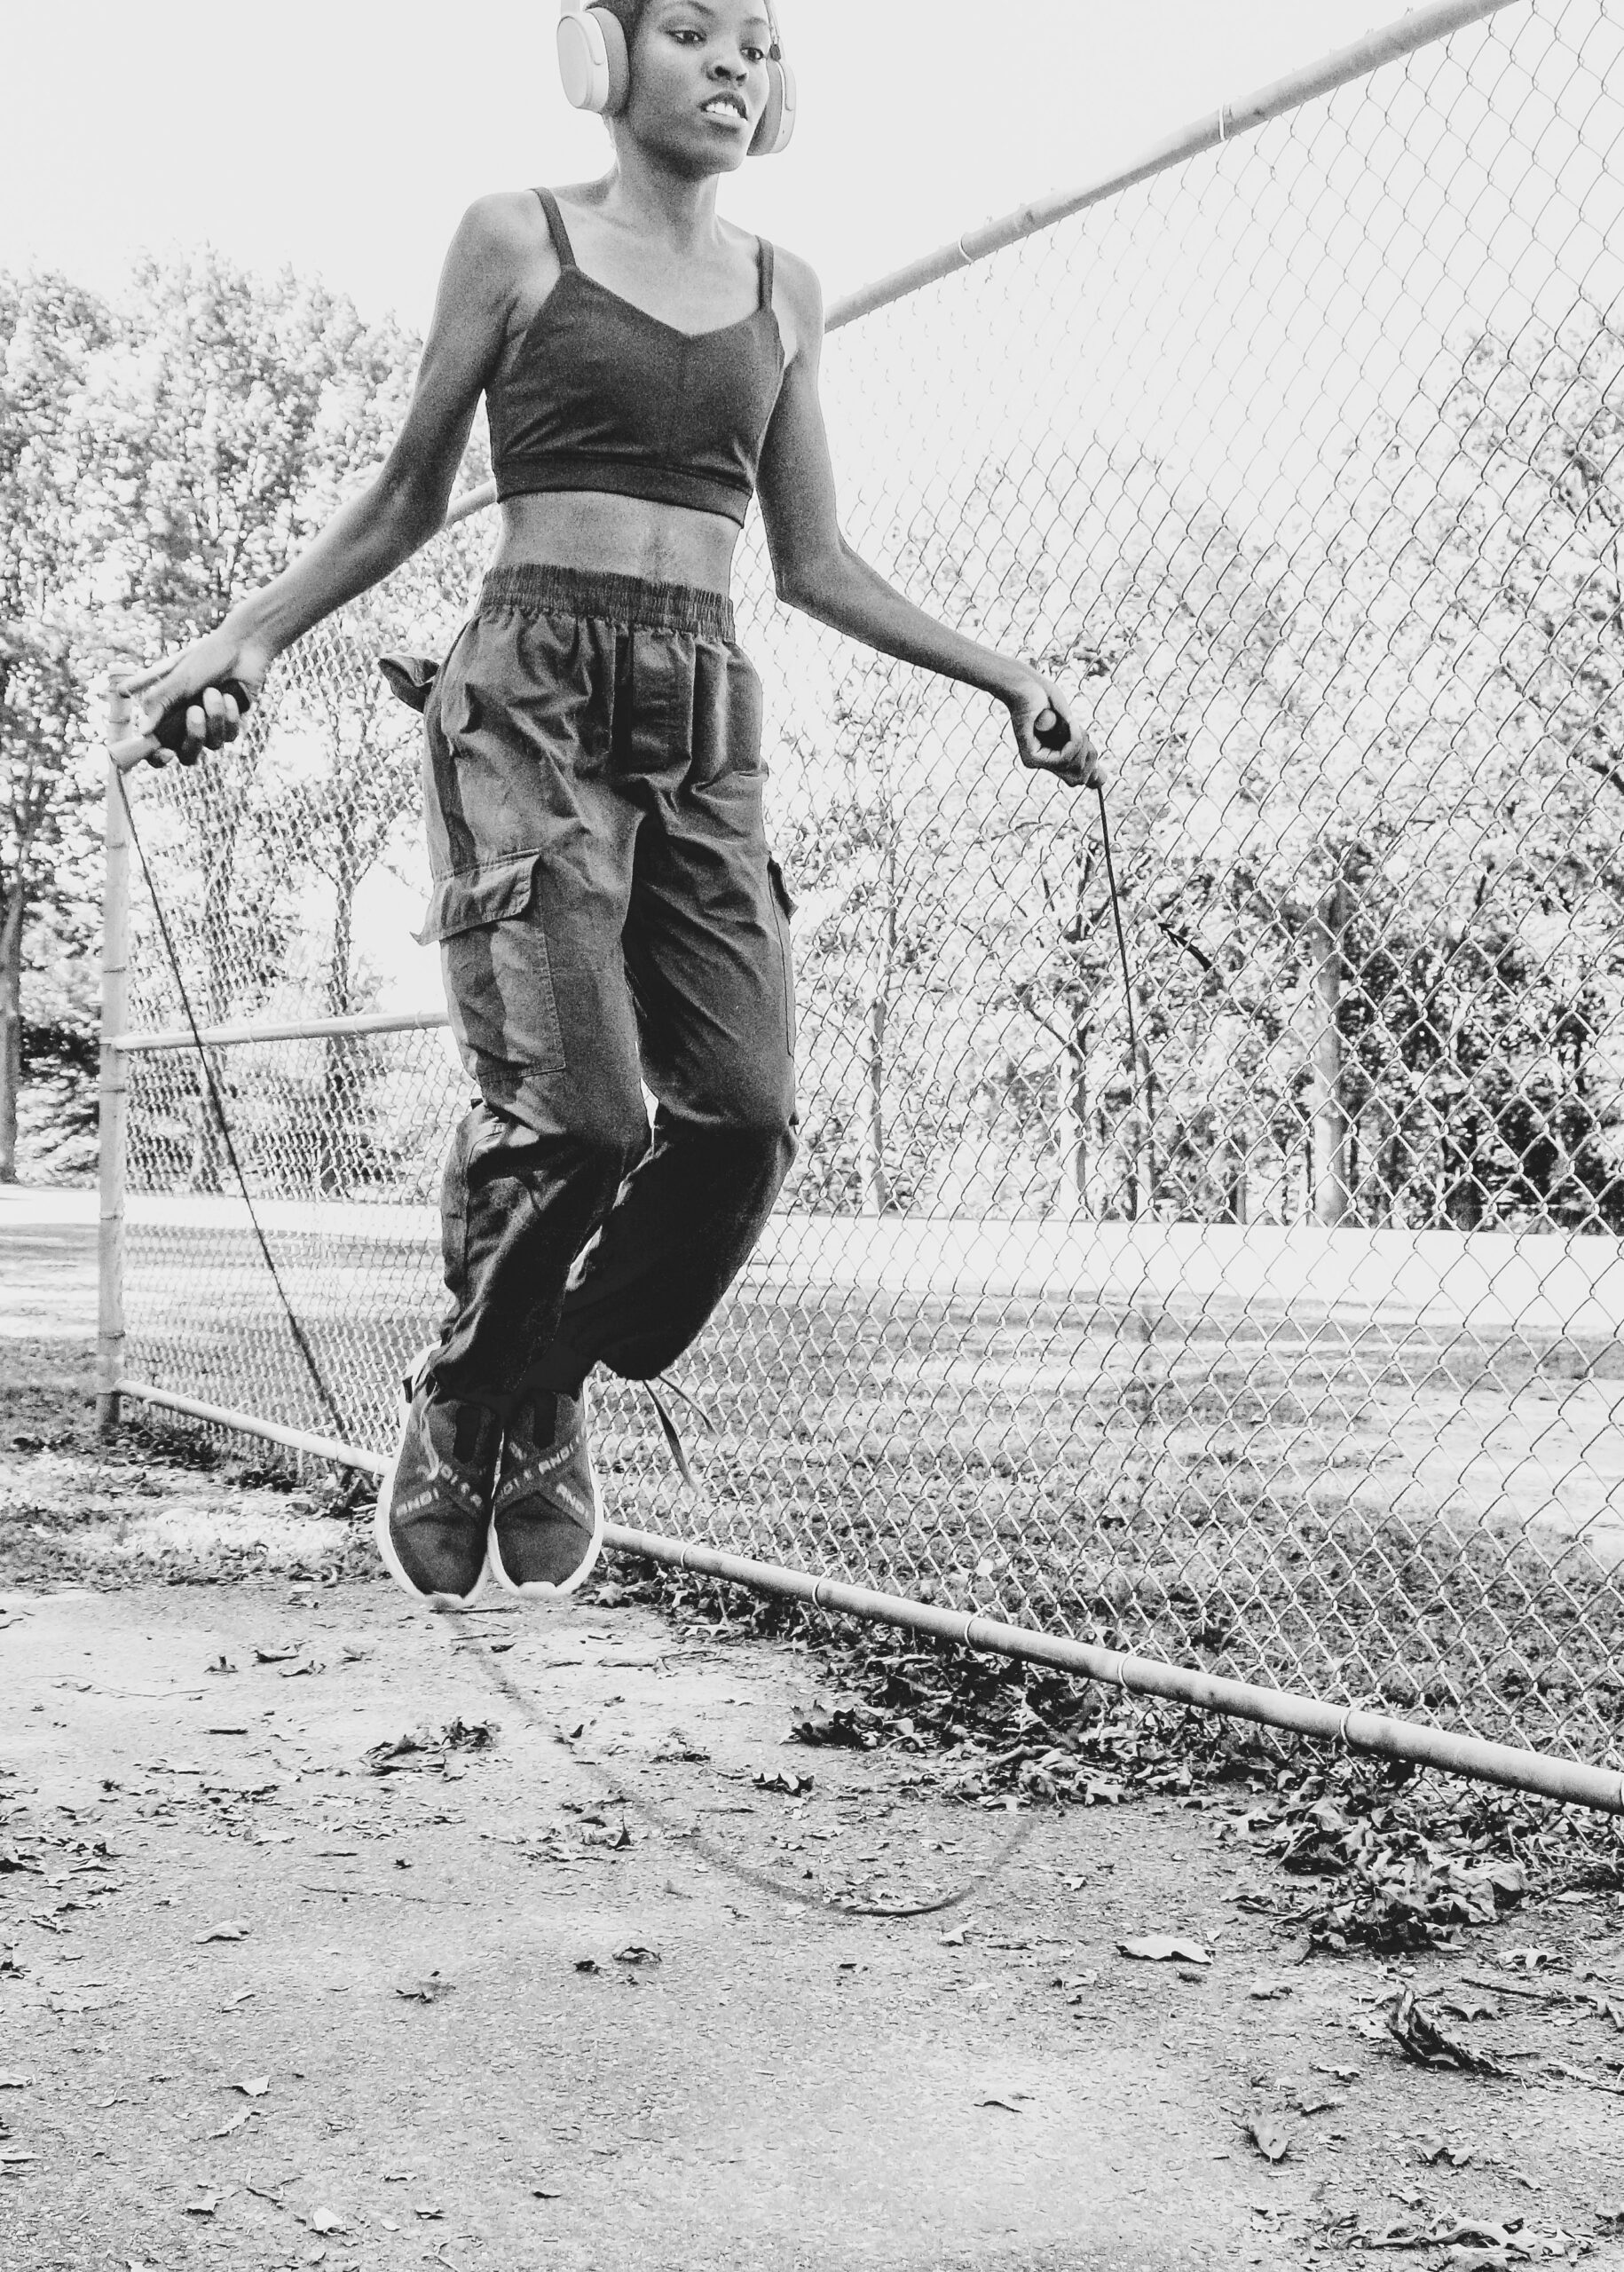 can jump rope skipping help keep fit 